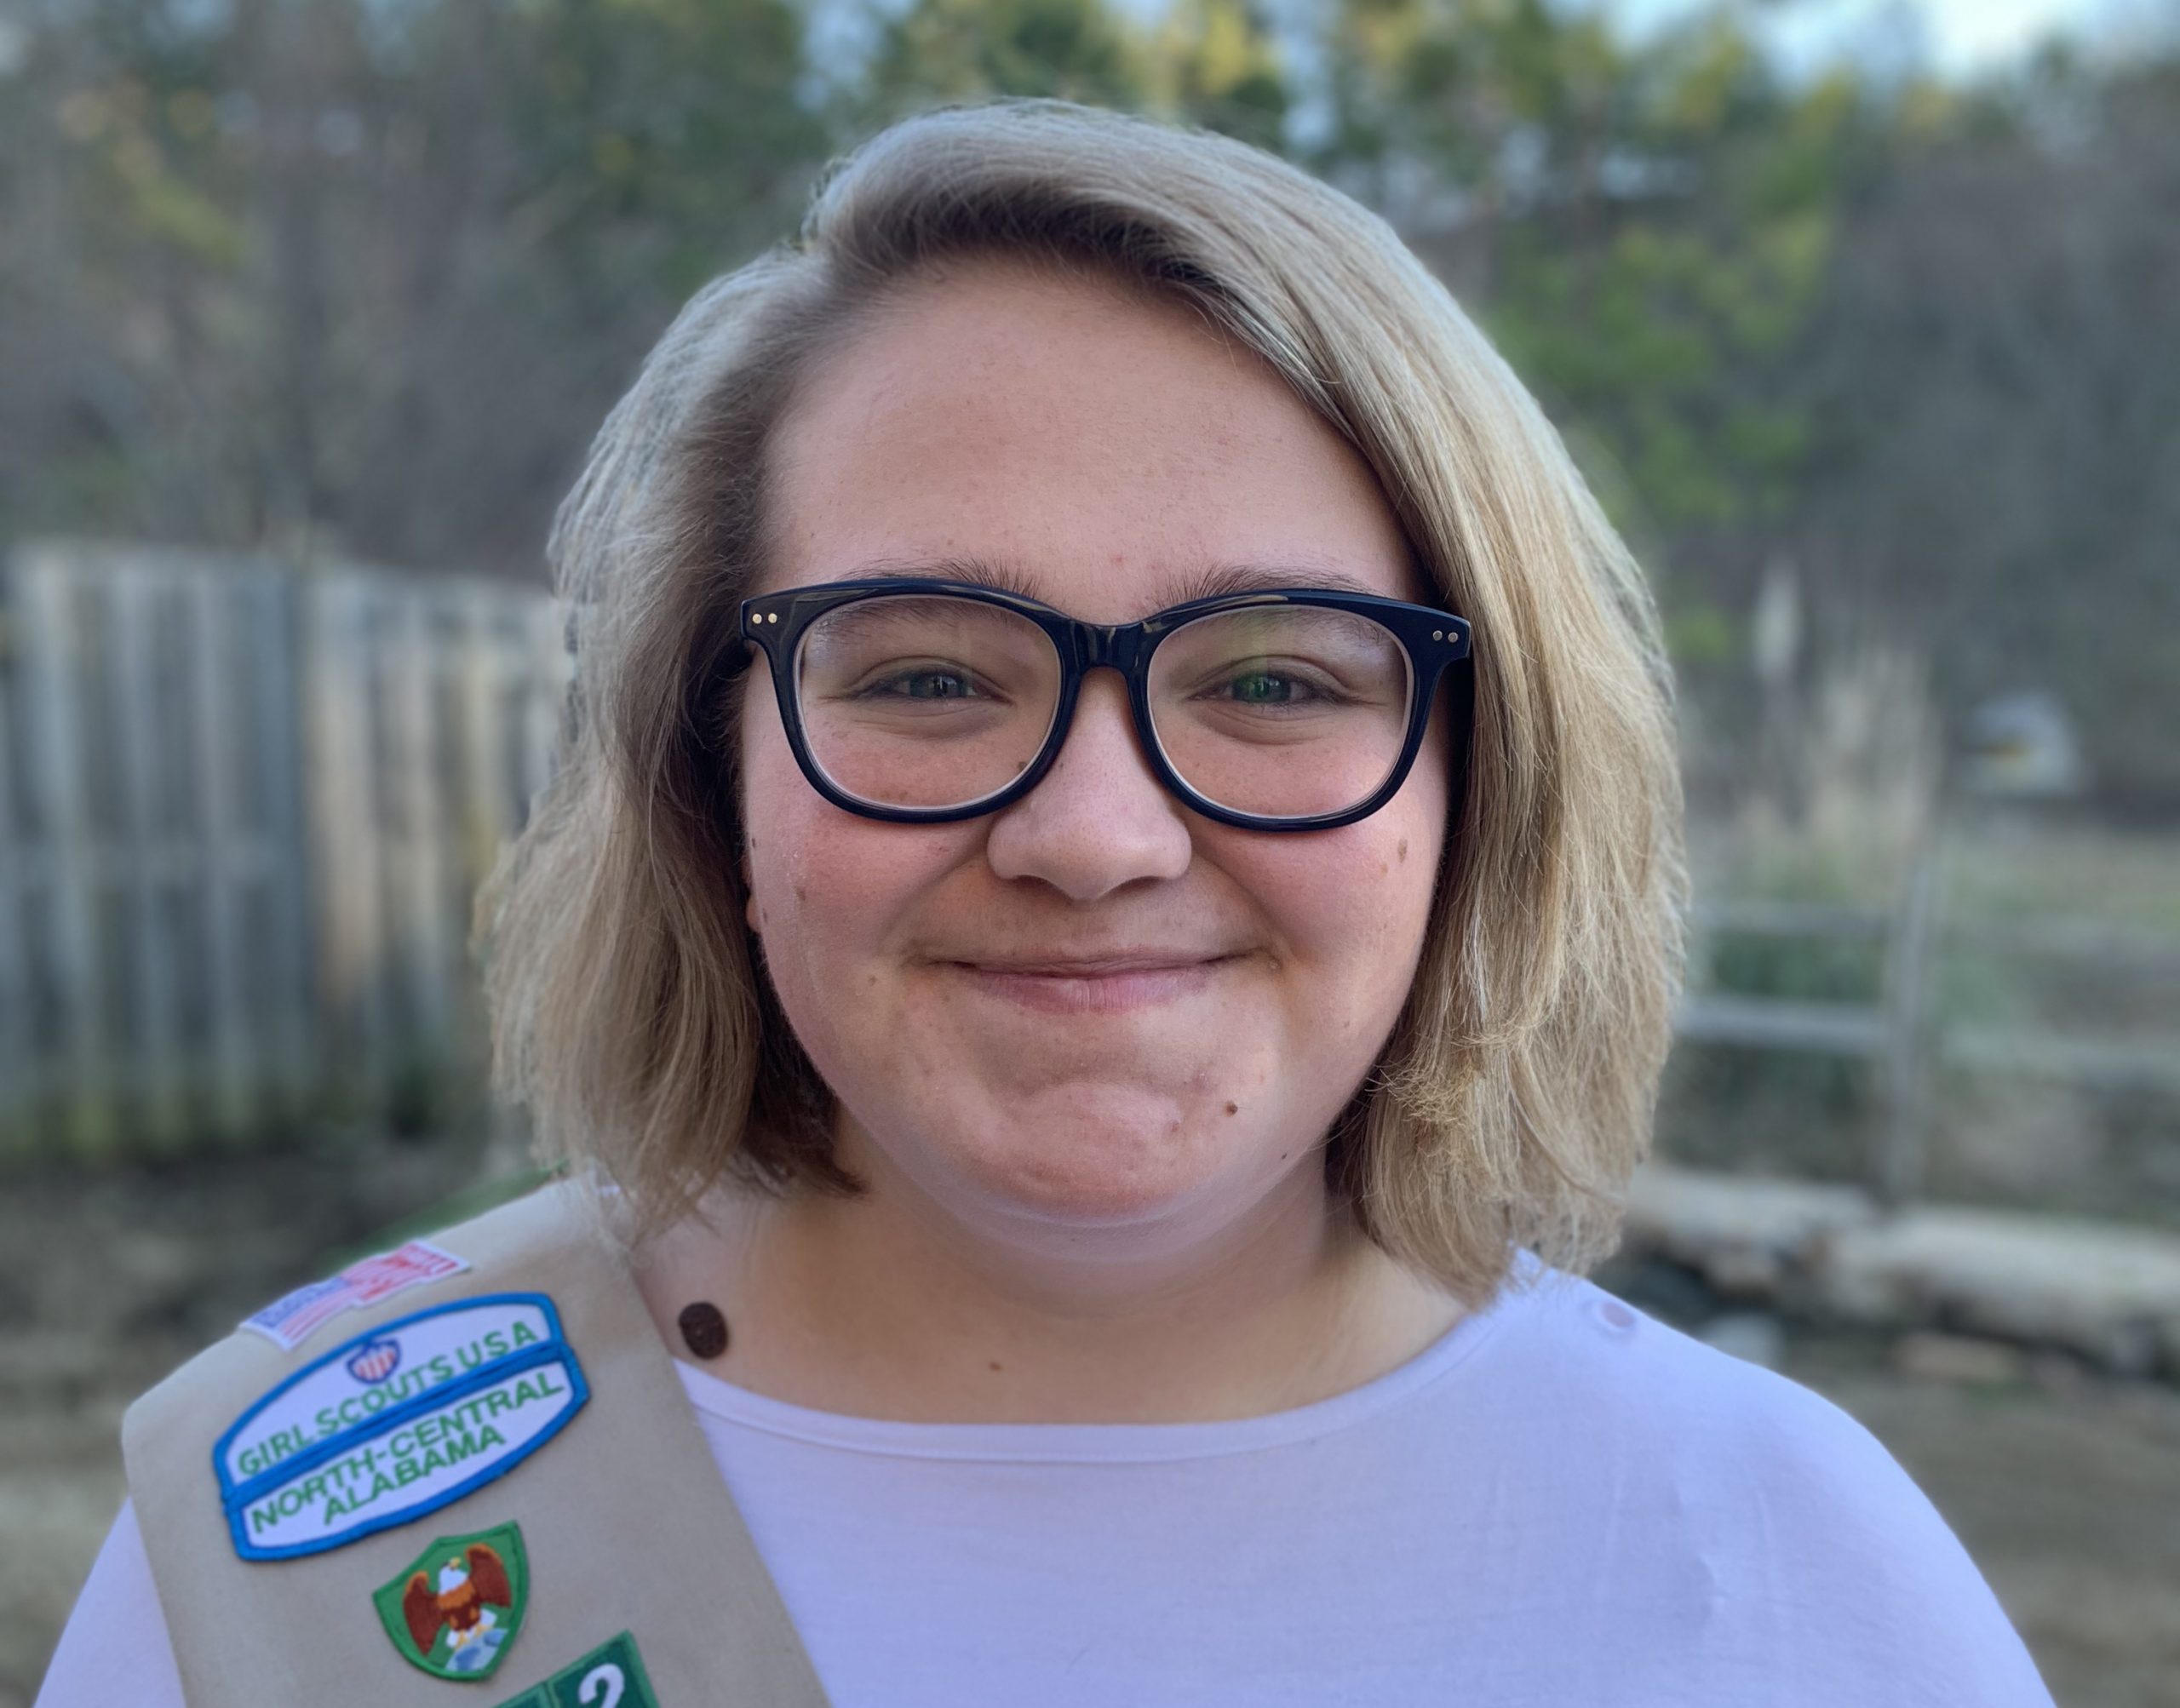 Trussville native, Girl Scout Ambassador designs Gold Award Project around animal abuse